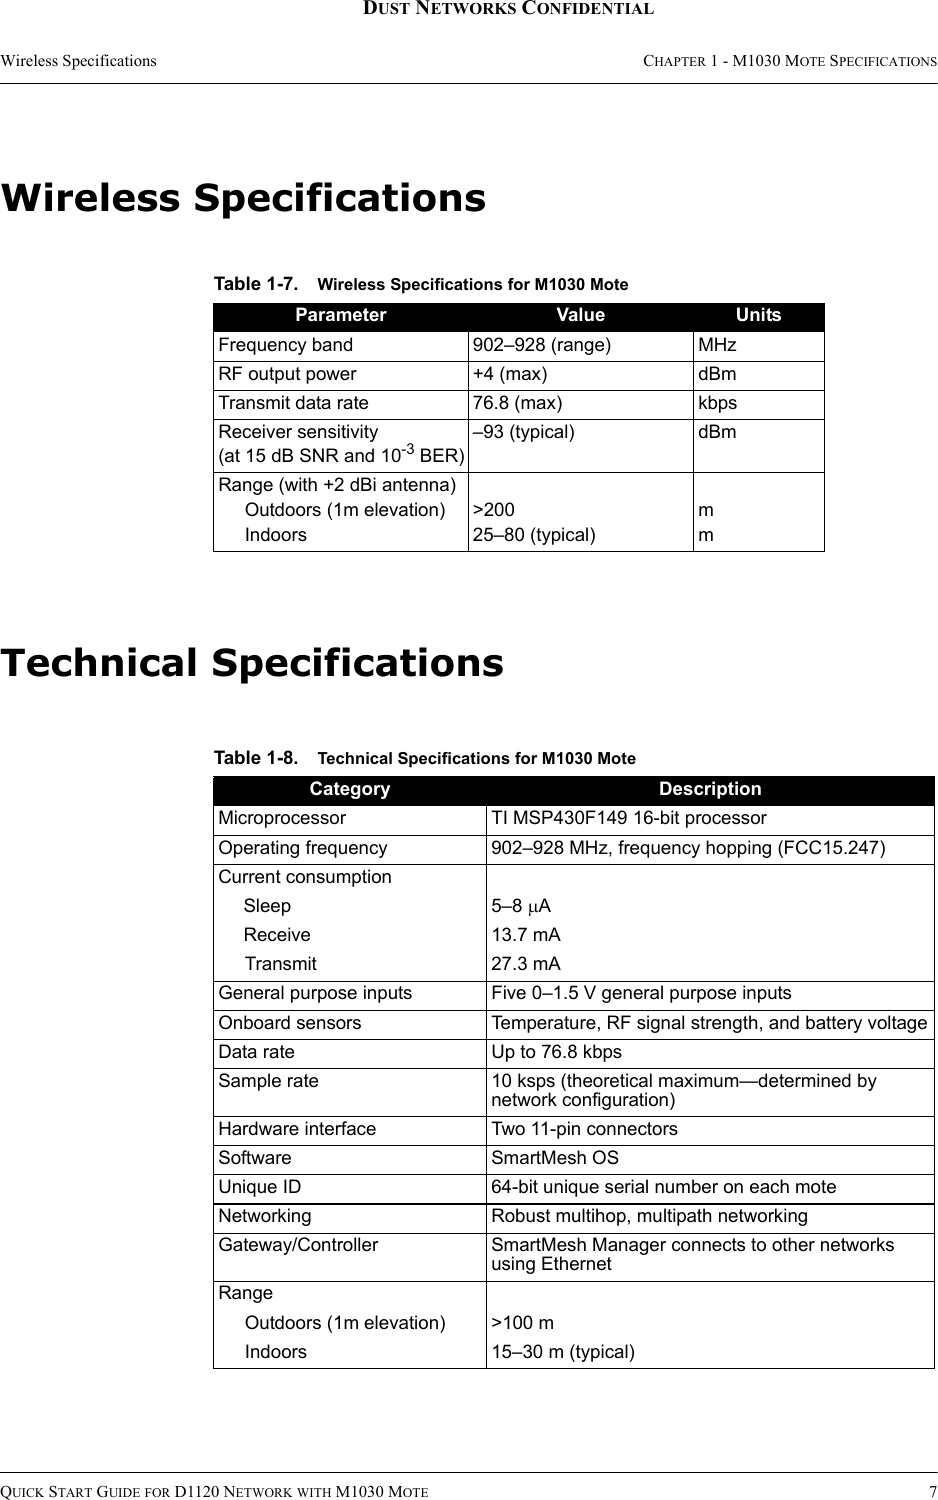 Wireless Specifications CHAPTER 1 - M1030 MOTE SPECIFICATIONSQUICK START GUIDE FOR D1120 NETWORK WITH M1030 MOTE 7DUST NETWORKS CONFIDENTIALWireless SpecificationsTechnical SpecificationsTable 1-7. Wireless Specifications for M1030 MoteParameter Value UnitsFrequency band 902–928 (range) MHzRF output power +4 (max) dBmTransmit data rate 76.8 (max) kbpsReceiver sensitivity (at 15 dB SNR and 10-3 BER)–93 (typical) dBmRange (with +2 dBi antenna)Outdoors (1m elevation)Indoors&gt;20025–80 (typical)mmTable 1-8. Technical Specifications for M1030 MoteCategory DescriptionMicroprocessor TI MSP430F149 16-bit processorOperating frequency 902–928 MHz, frequency hopping (FCC15.247)Current consumptionSleep 5–8 µAReceive 13.7 mATransmit 27.3 mAGeneral purpose inputs Five 0–1.5 V general purpose inputsOnboard sensors Temperature, RF signal strength, and battery voltageData rate Up to 76.8 kbpsSample rate 10 ksps (theoretical maximum—determined by network configuration)Hardware interface Two 11-pin connectorsSoftware SmartMesh OSUnique ID 64-bit unique serial number on each moteNetworking Robust multihop, multipath networkingGateway/Controller SmartMesh Manager connects to other networks using EthernetRangeOutdoors (1m elevation) &gt;100 mIndoors 15–30 m (typical)